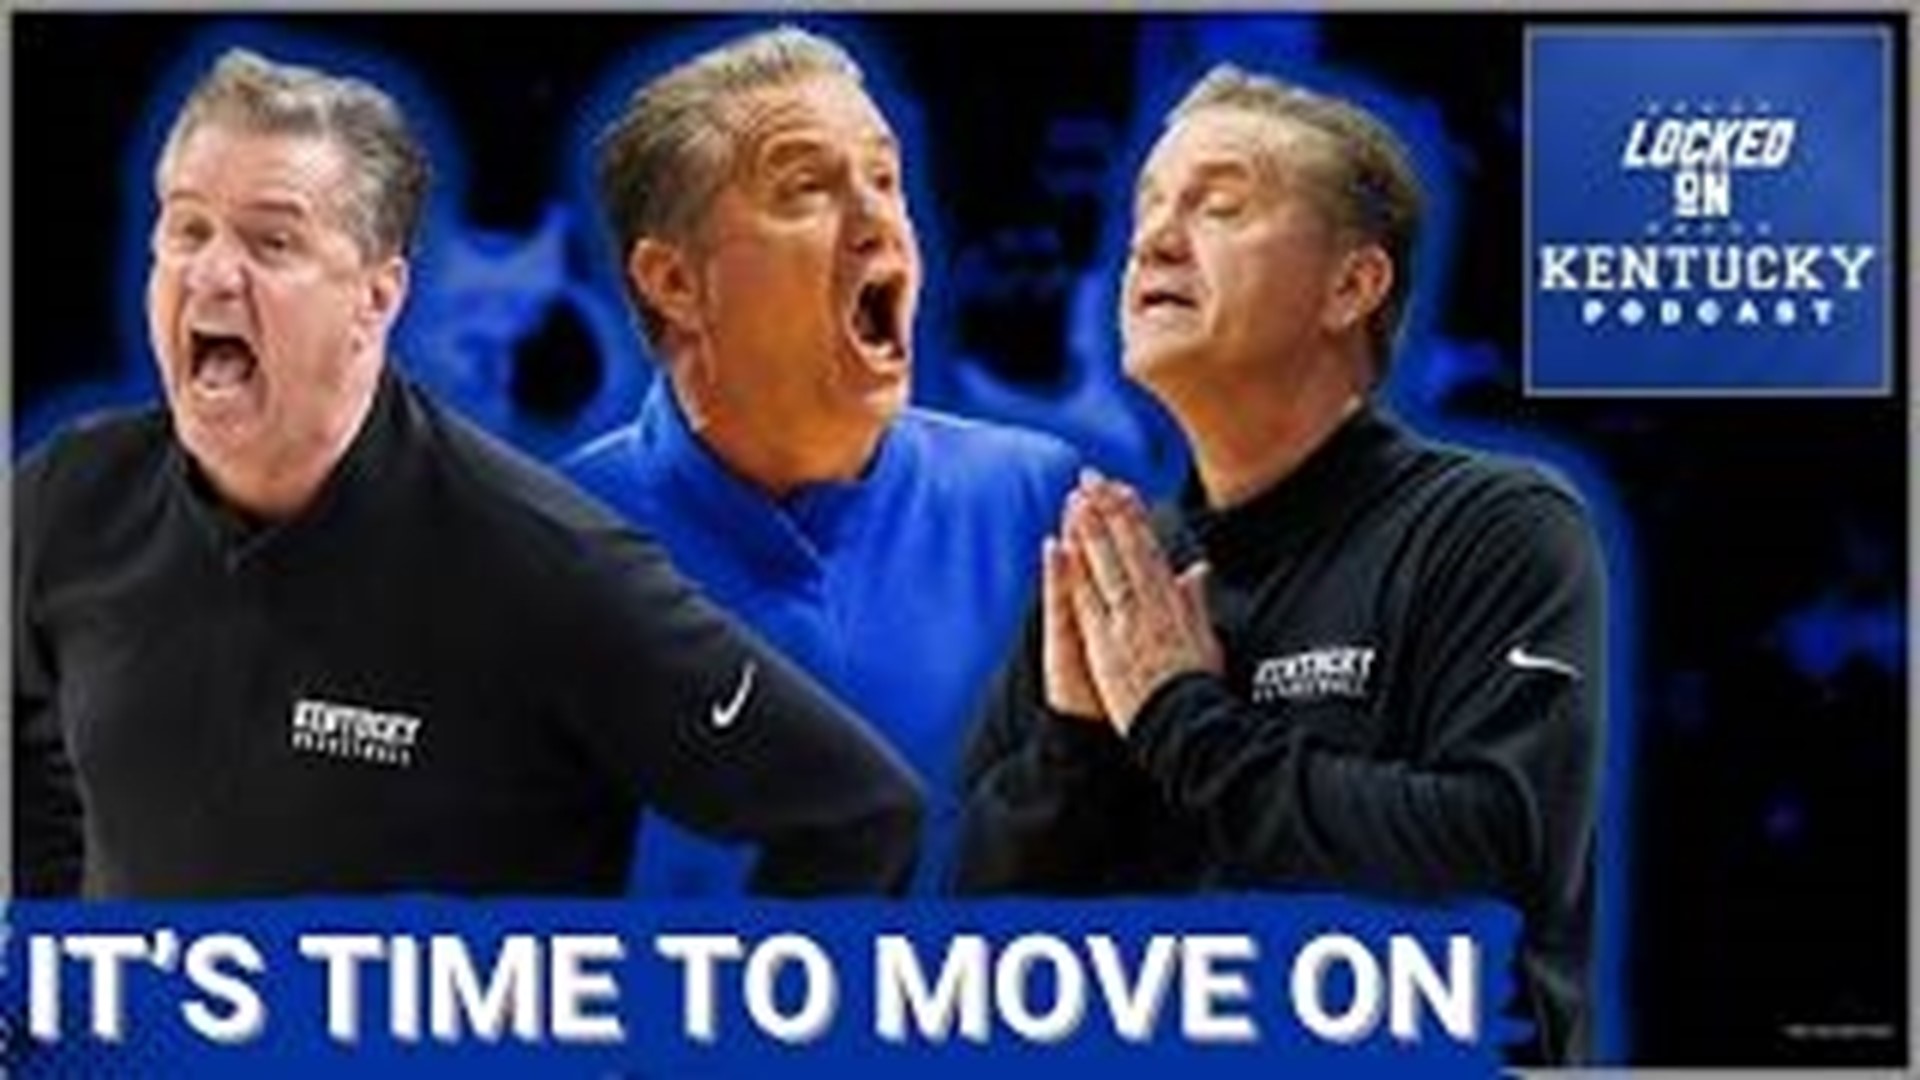 It's time for the Kentucky Wildcats and John Calipari to part ways.